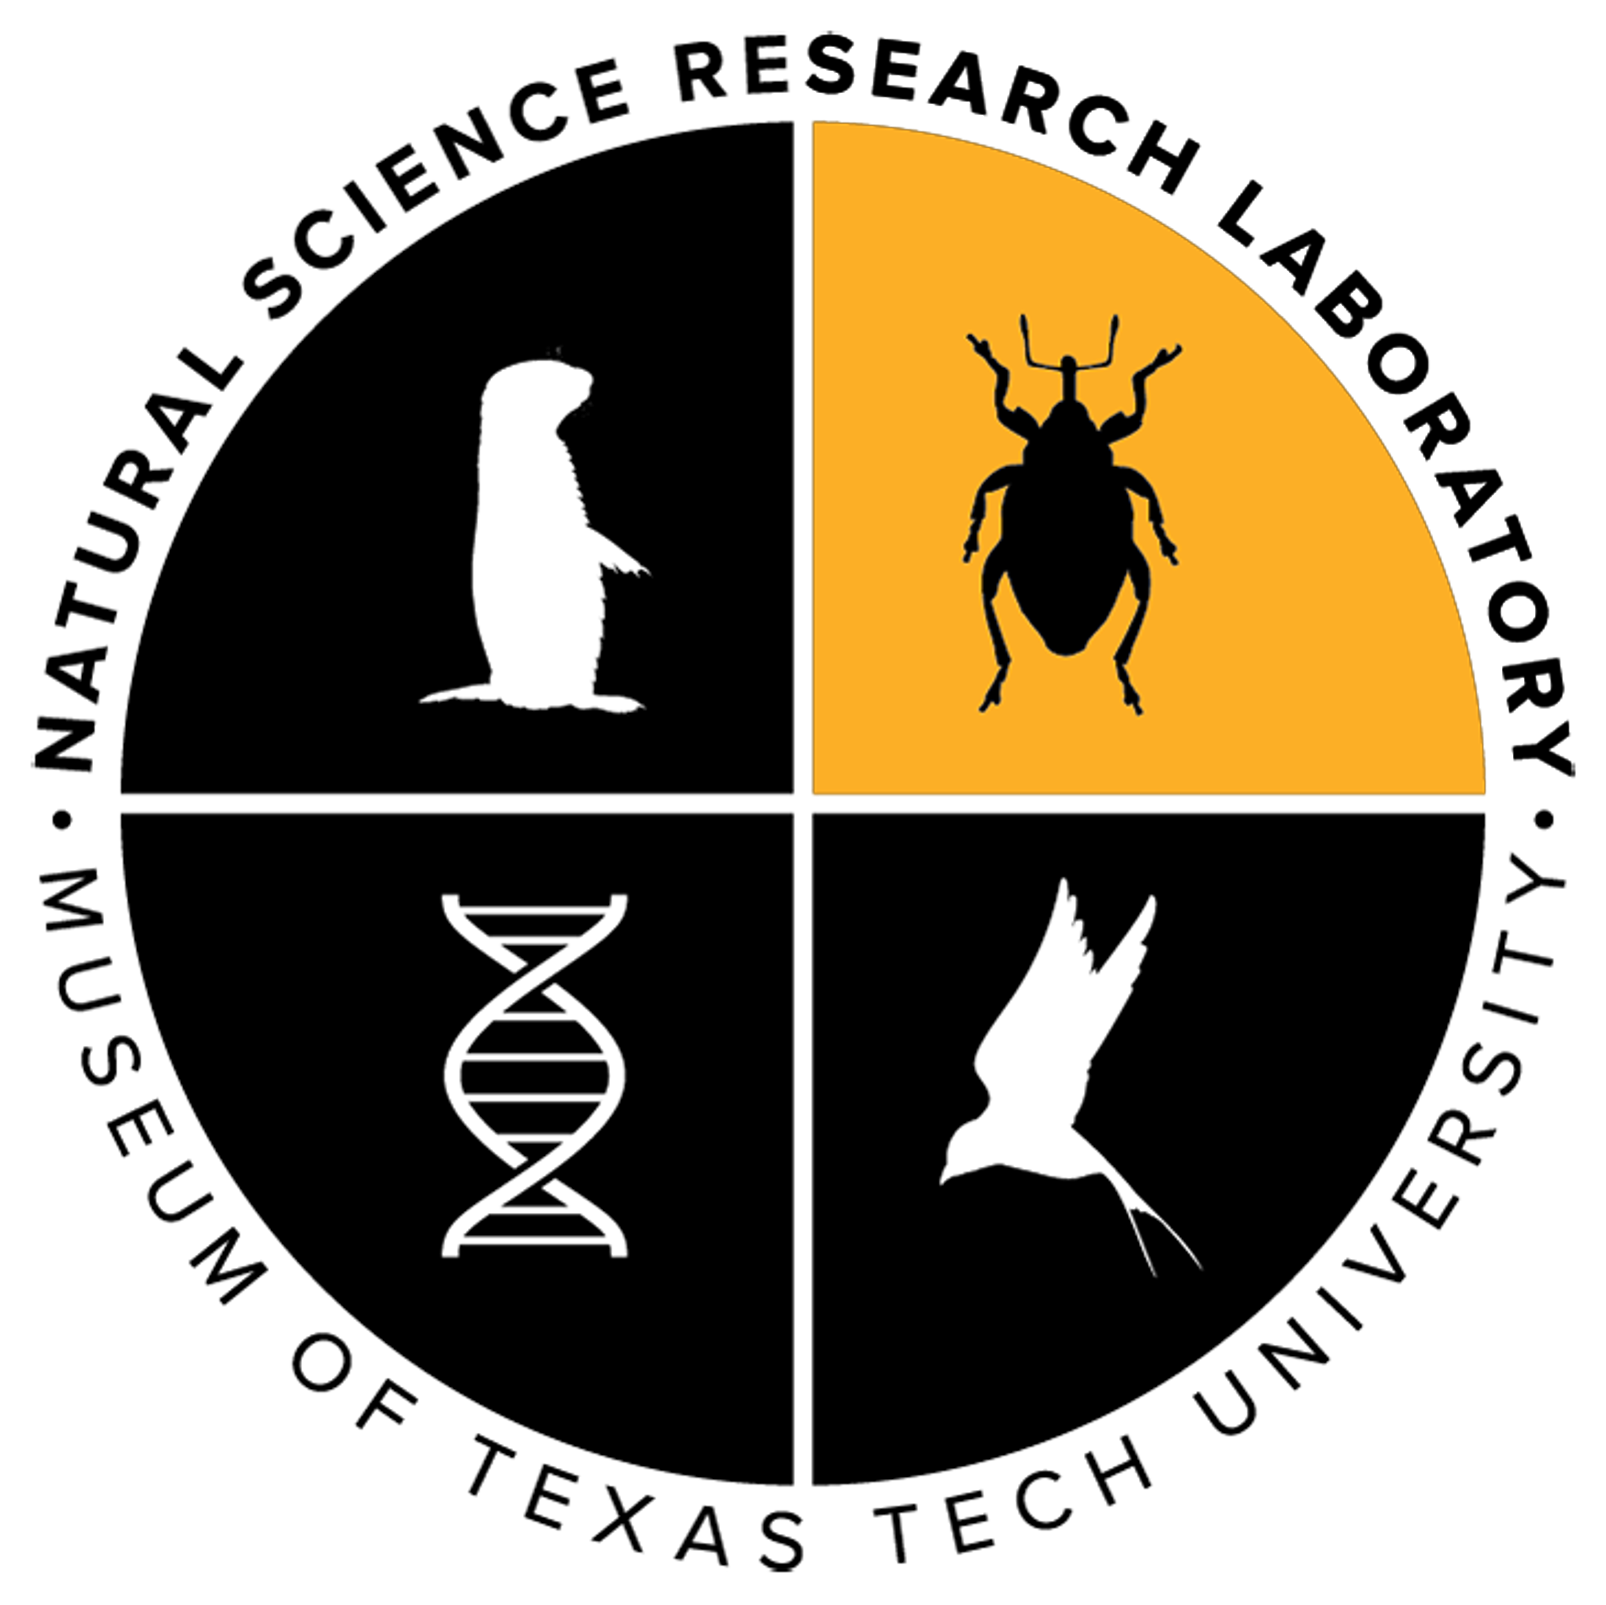 The Invertebrate Zoology Collection component of the logo of the Natural Science Research Laboratory: the sillhouette of a weevil over yellow background